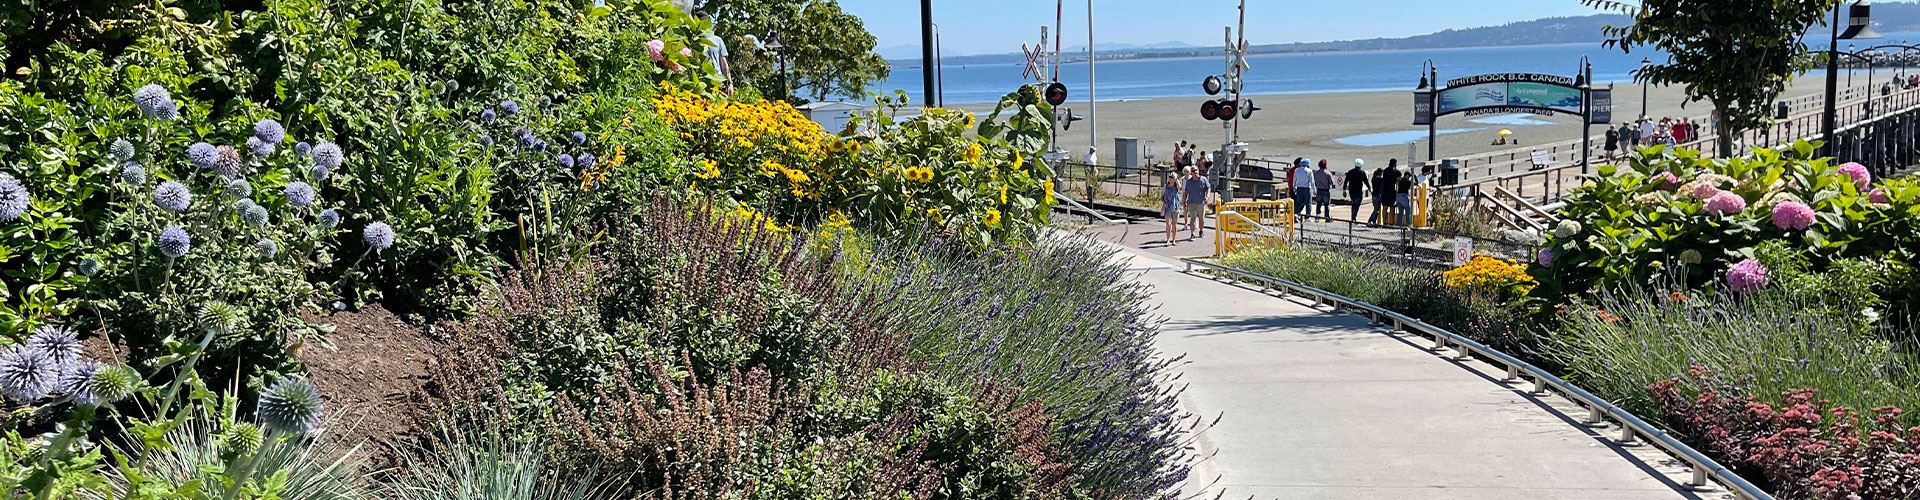 pathway leading to waterfront pier with yellow flowers on a sunny day